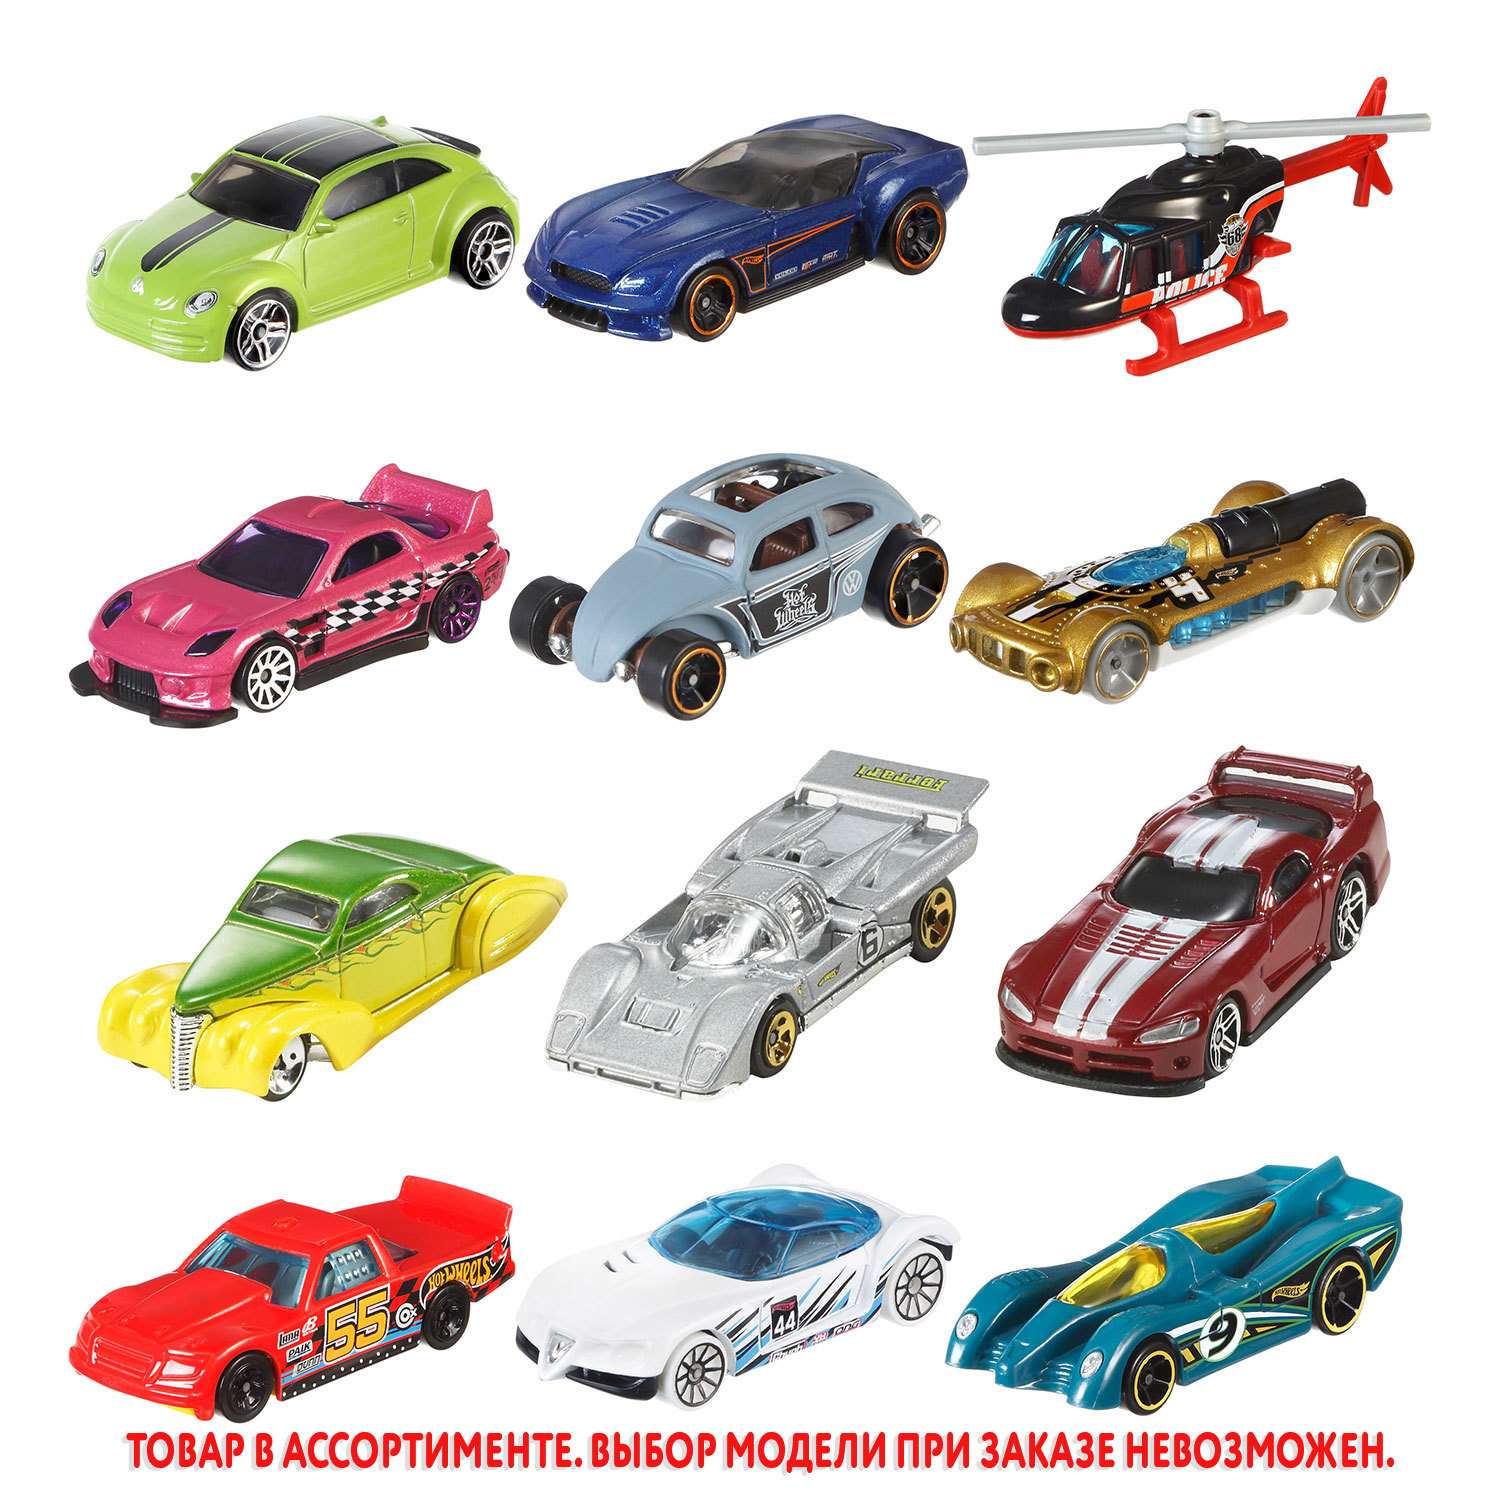 Hot Wheels Set of 20 Toy Sports & Race Cars in 1:64 Scale, Collectible  Vehicles (Styles May Vary) 